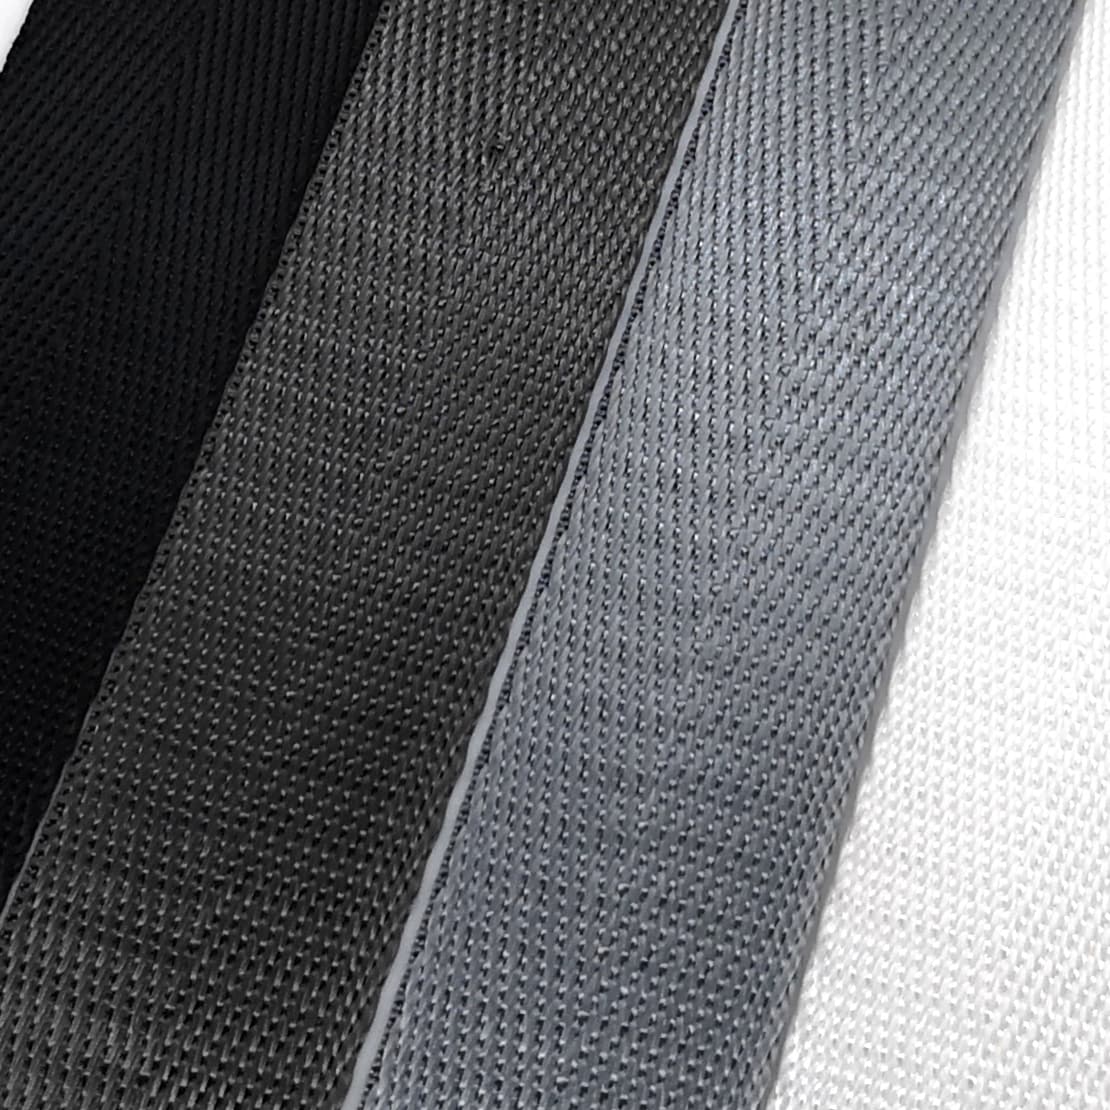 1" Wide Webbing -Solid Color - CHARCOAL